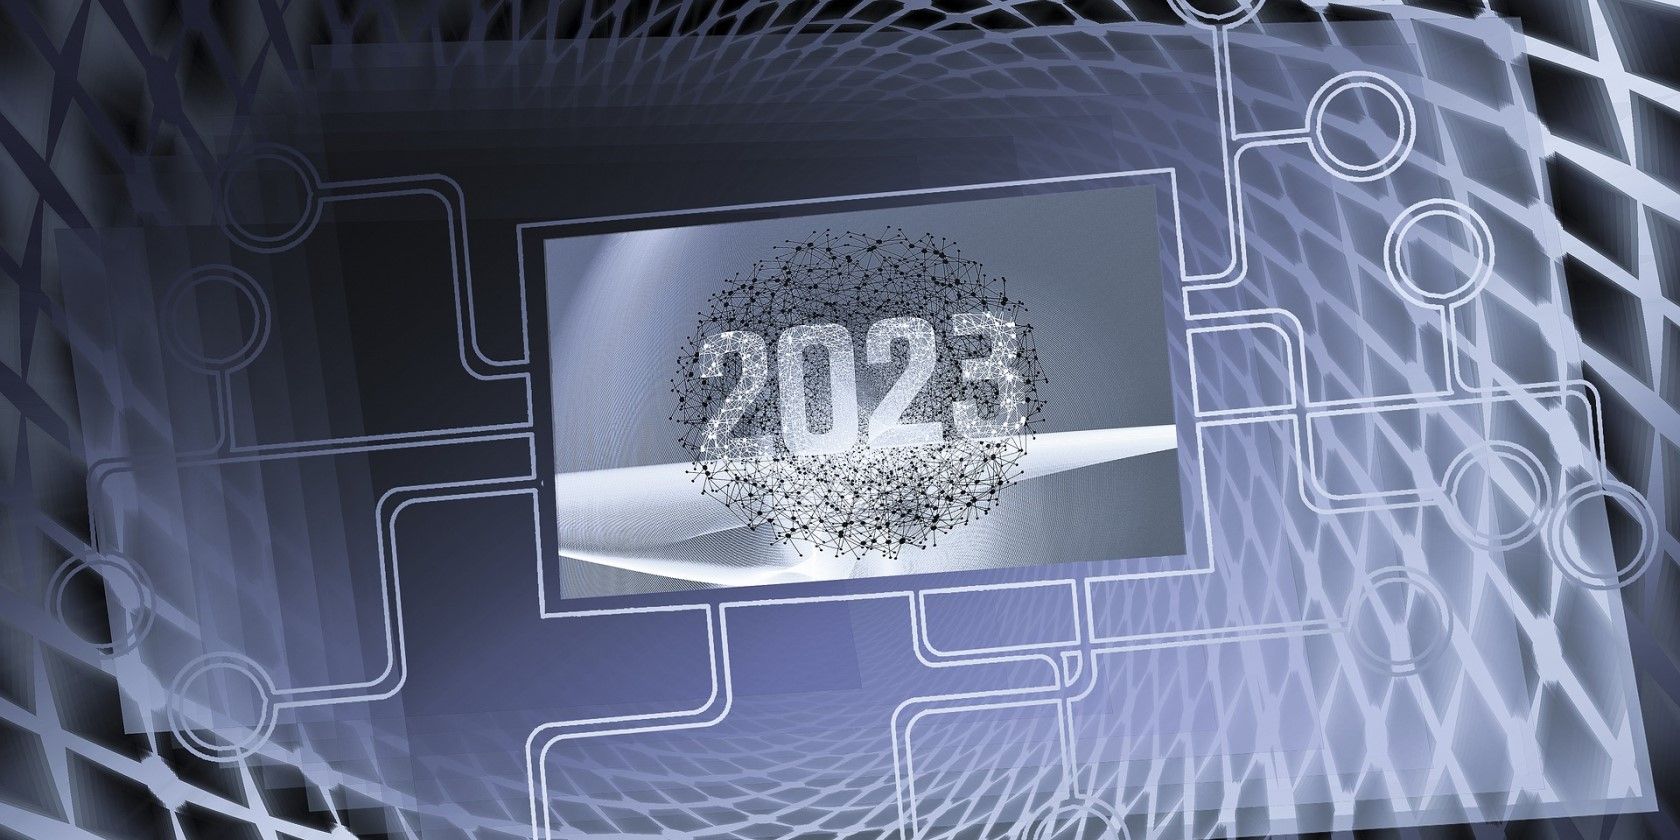 Lots of new smart devices coming in 2023